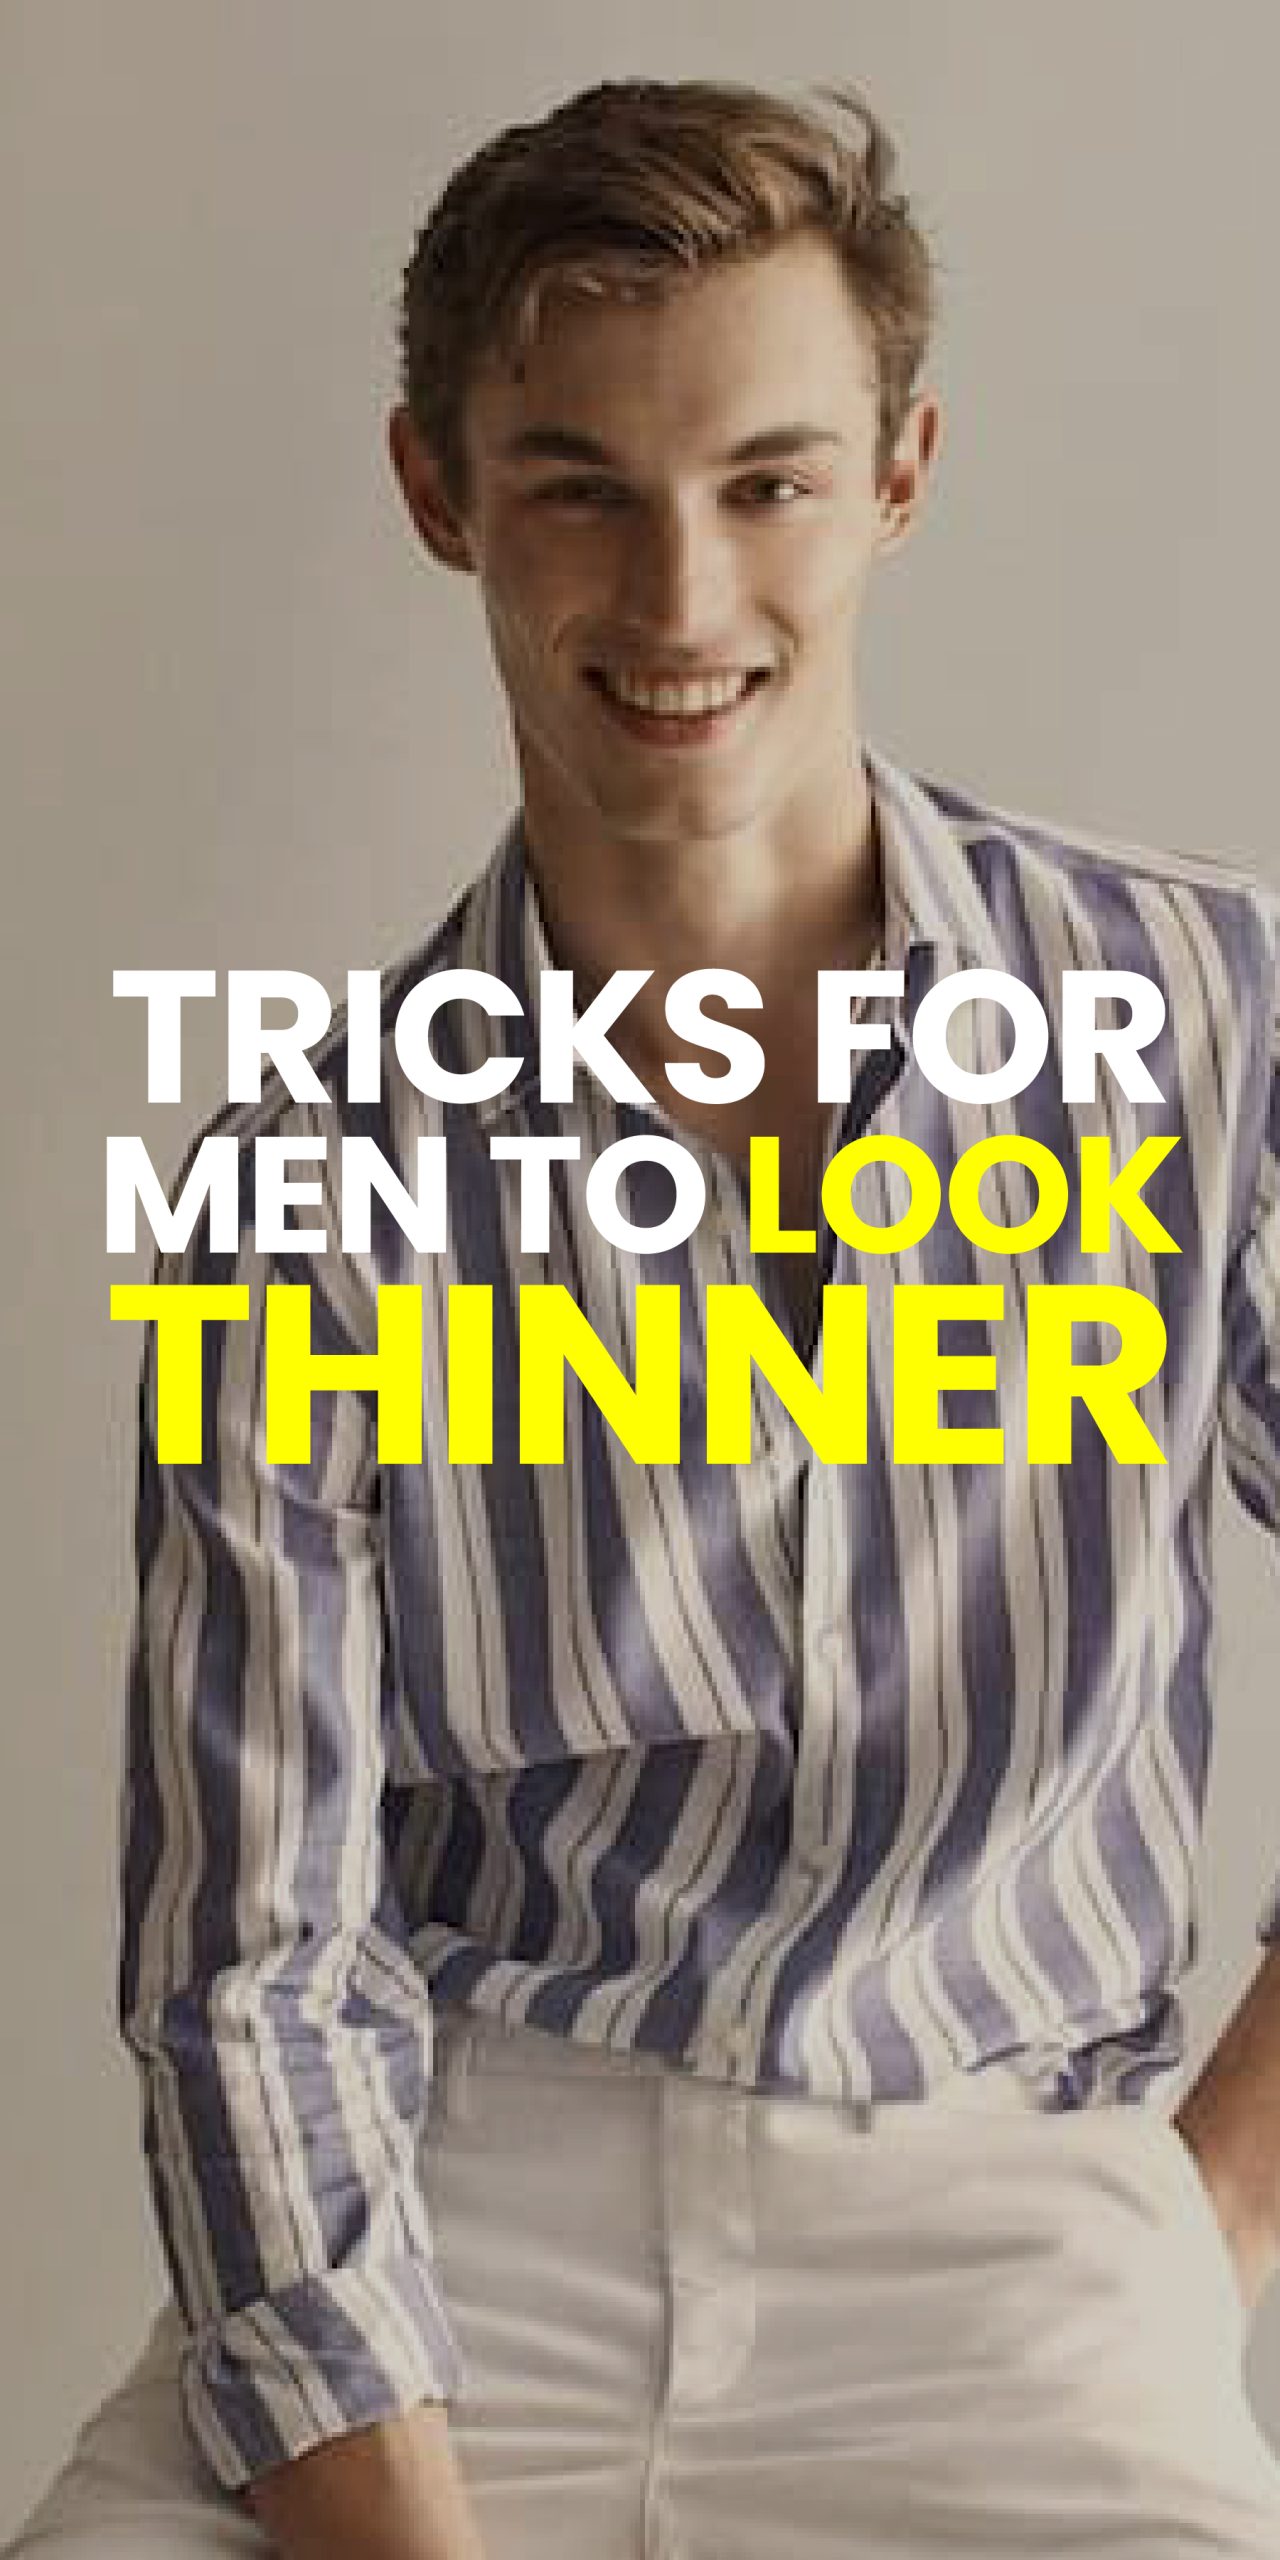 TRICKS FOR MEN TO LOOK THINNER